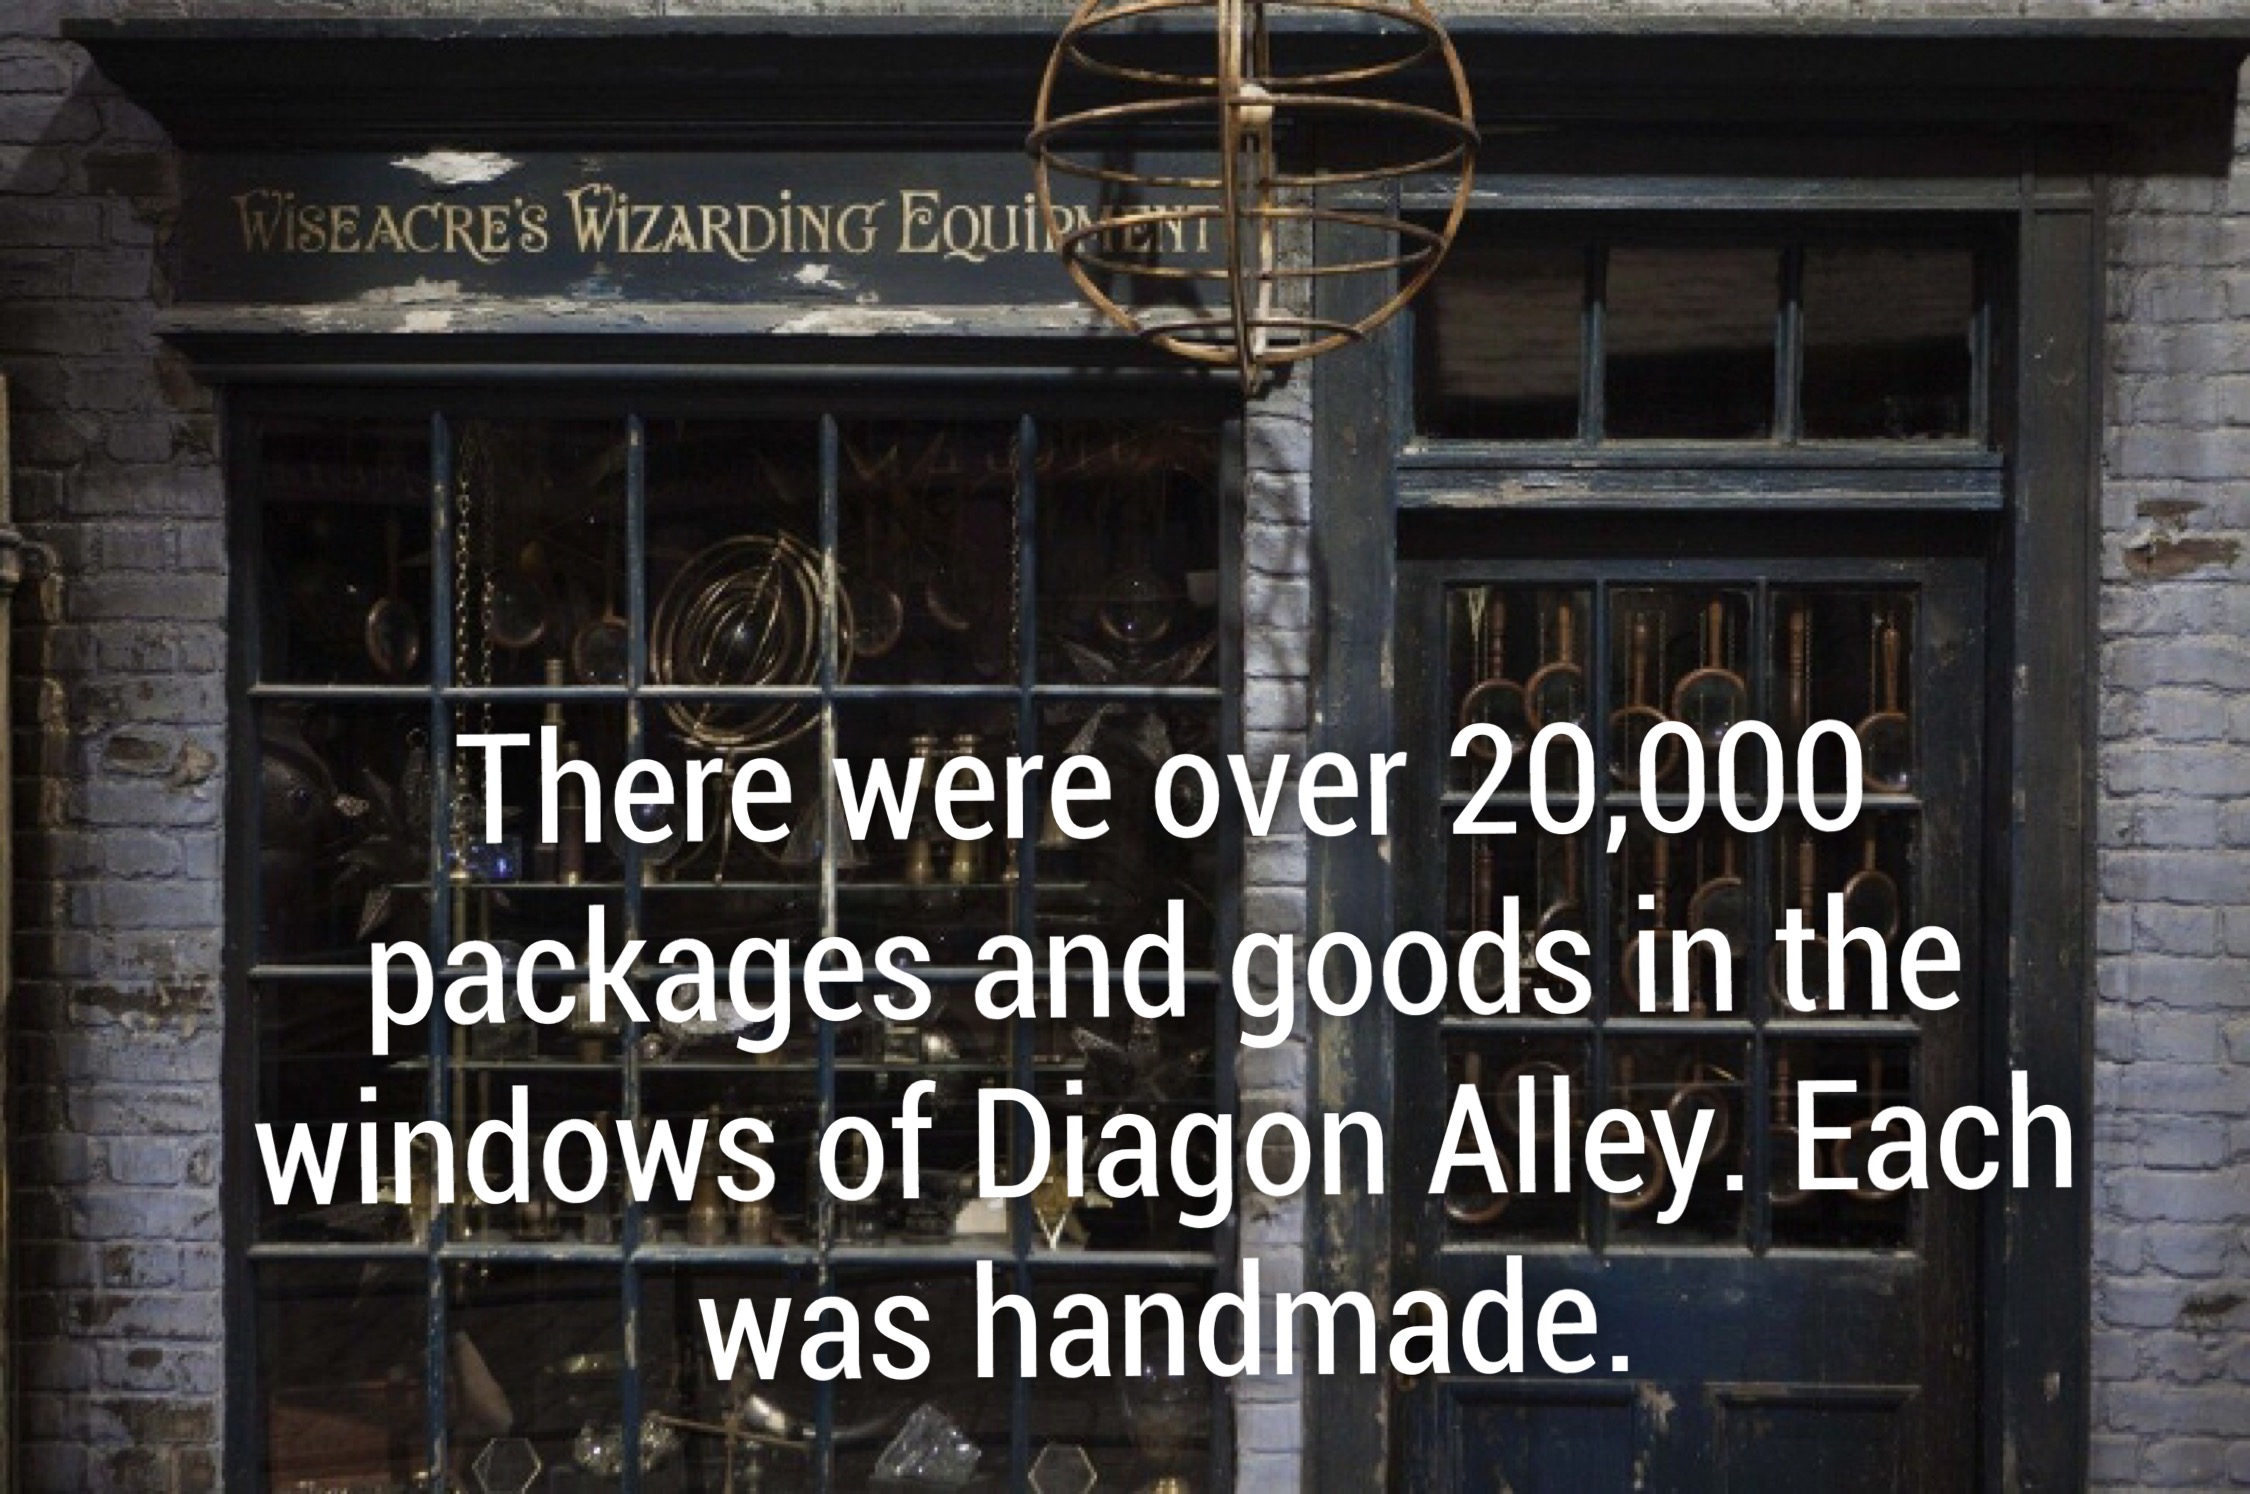 Film - Wiseacre'S Wizarding Equipment There were over 20,000 packages and goods in the windows of Diagon Alley. Each was handmade.